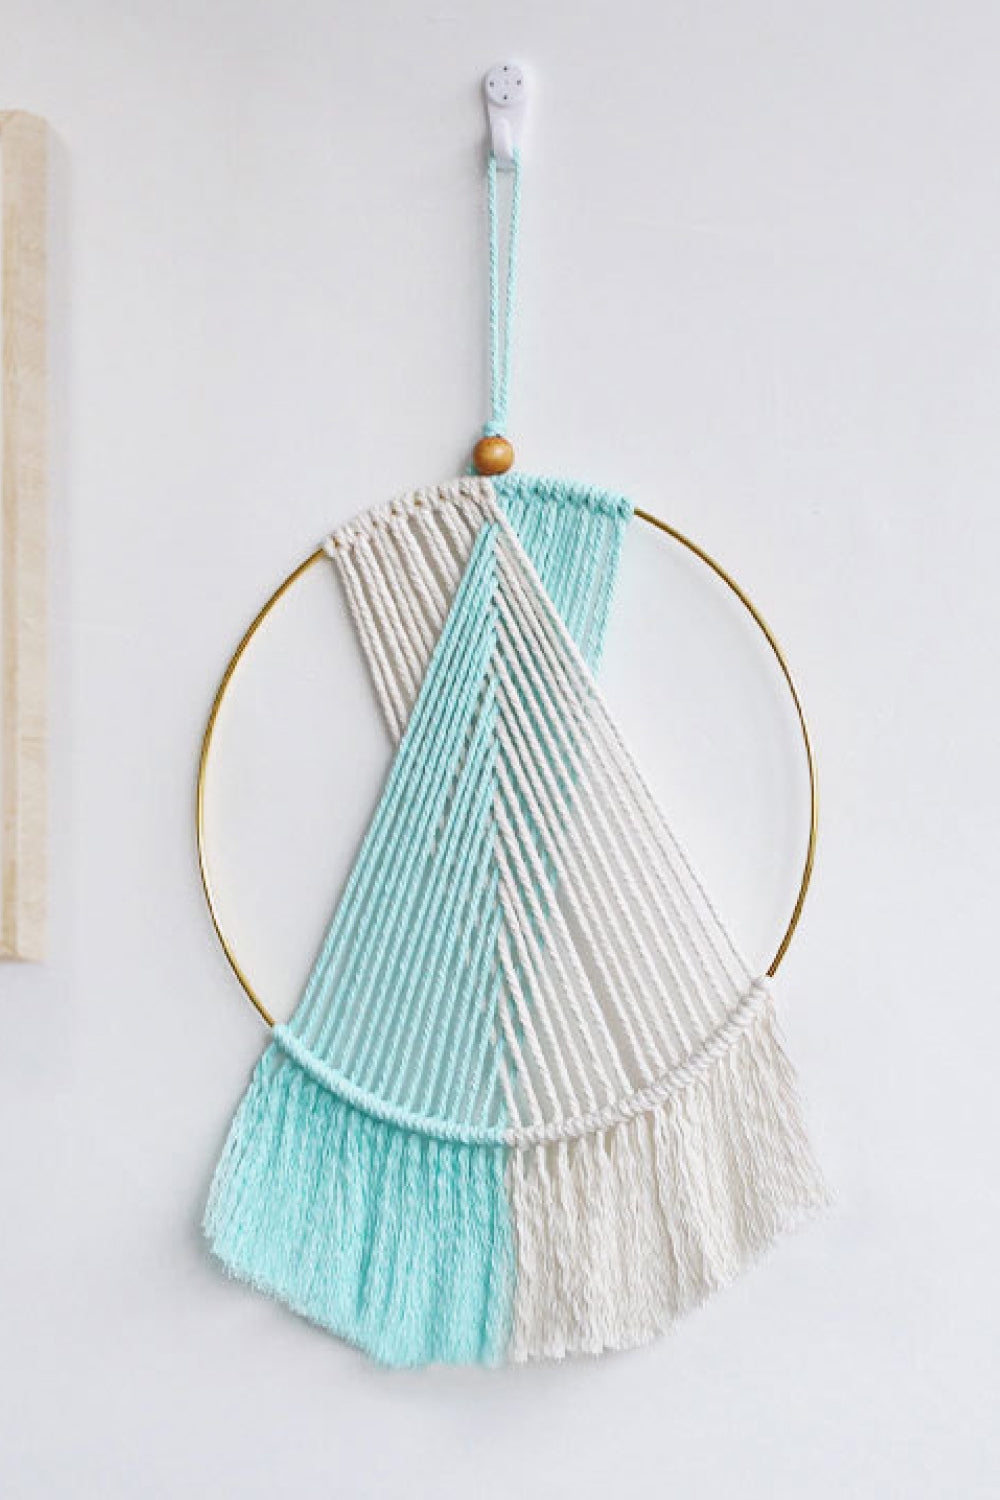 Light Gray Contrast Fringe Round Macrame Wall Hanging Sentient Beauty Fashions Home Decor